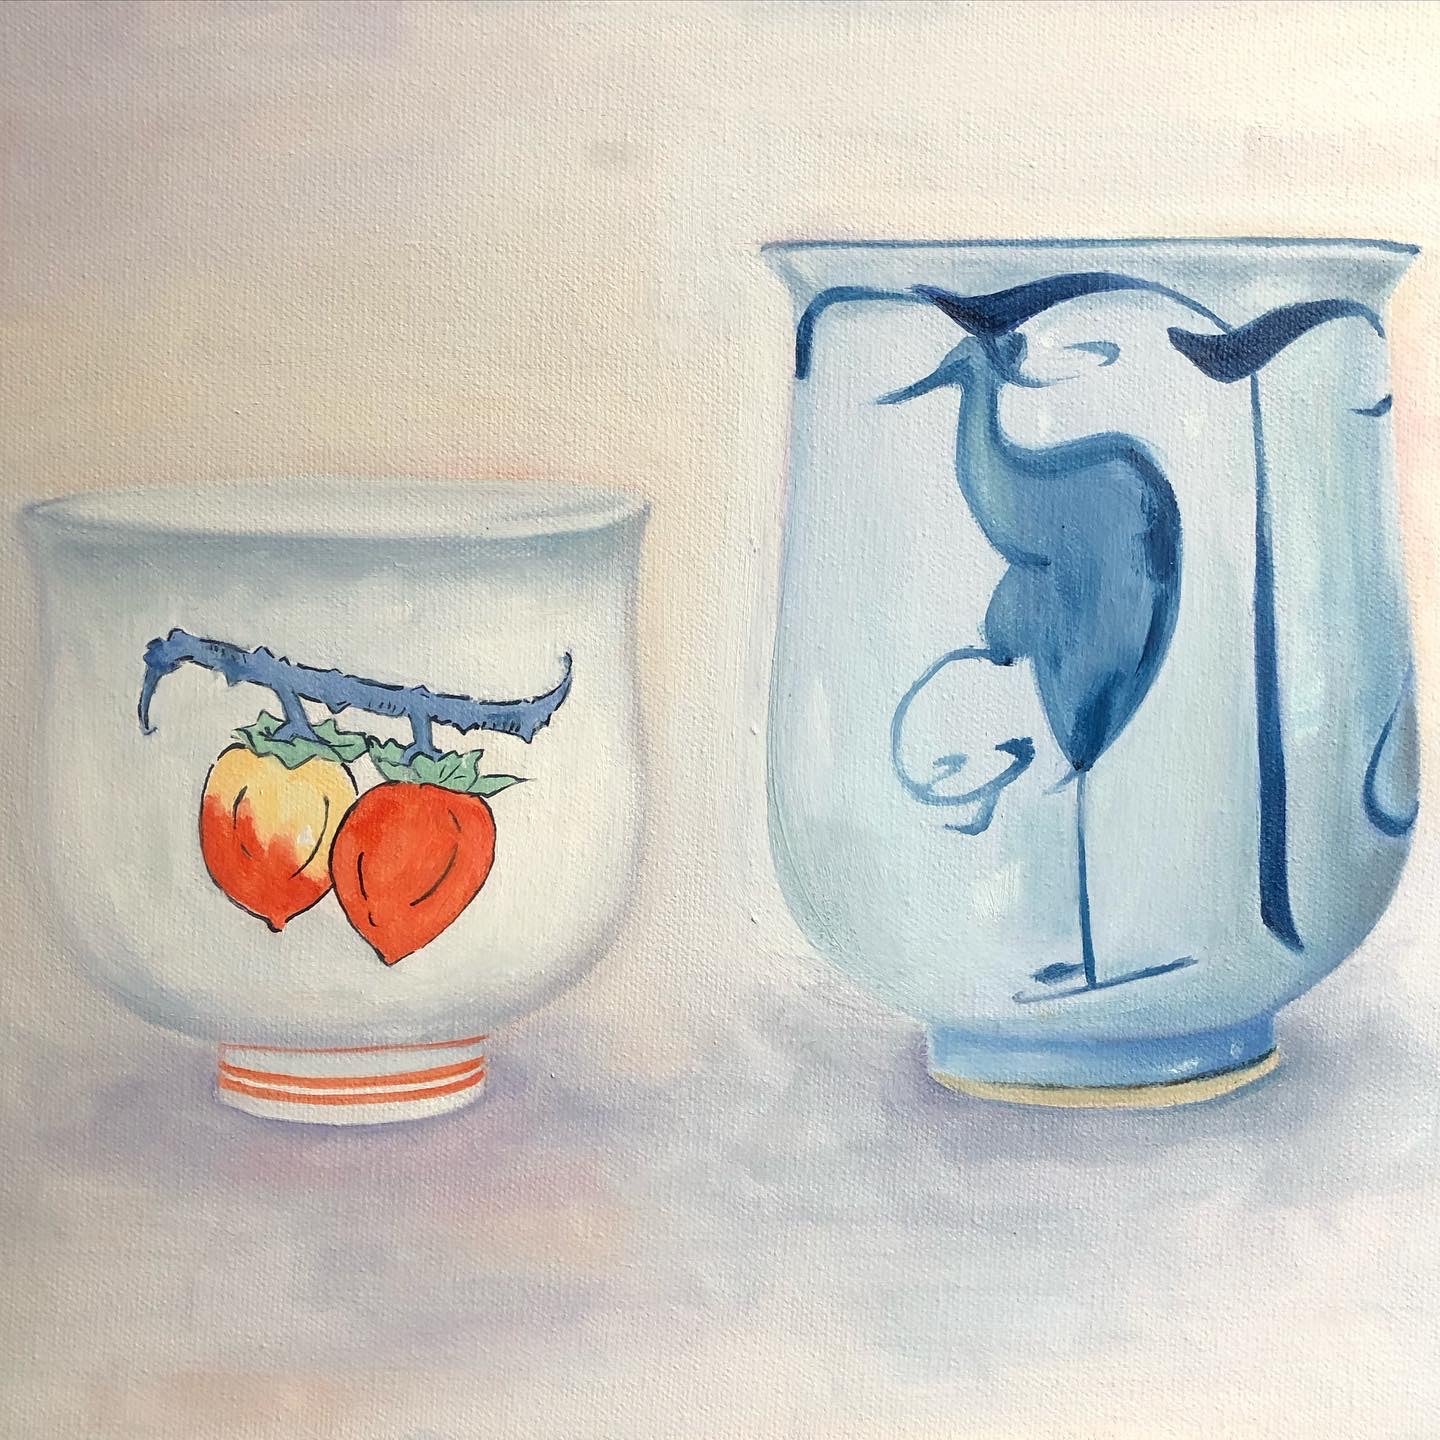 oil painting of two traditional Japanese ceramic sake cups, including persimmons and crane